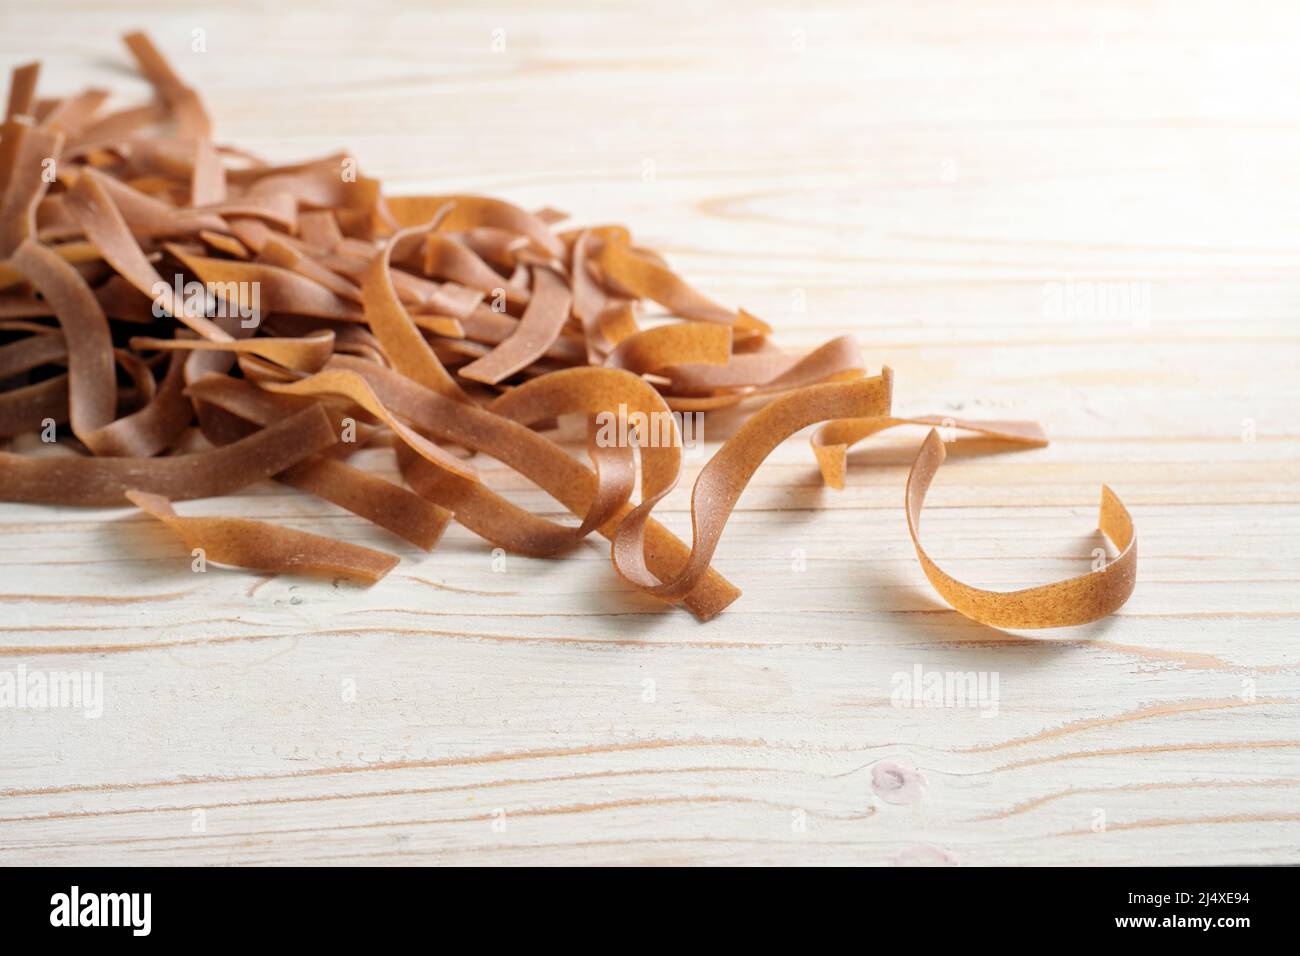 Heap of wholegrain tagliatelle noodles, healthy pasta alternative with fiber, protein, B vitamins and minerals, light wooden table, copy space, select Stock Photo